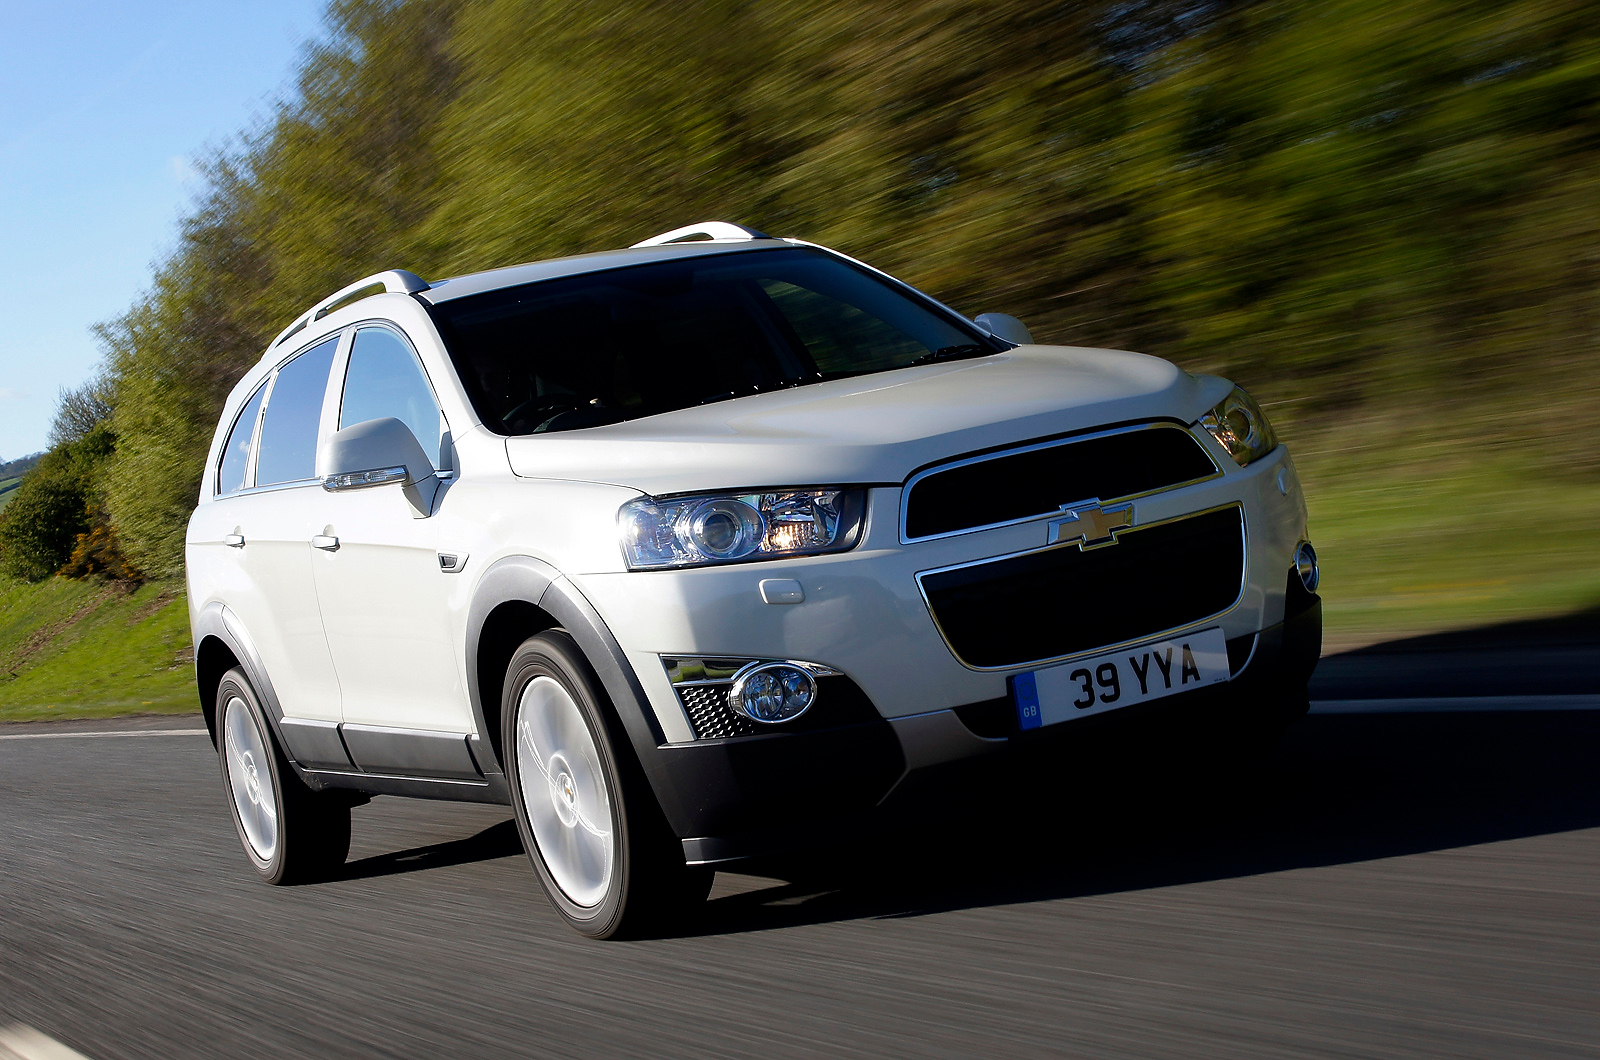 Used Chevrolet Captiva 2007-2015 review